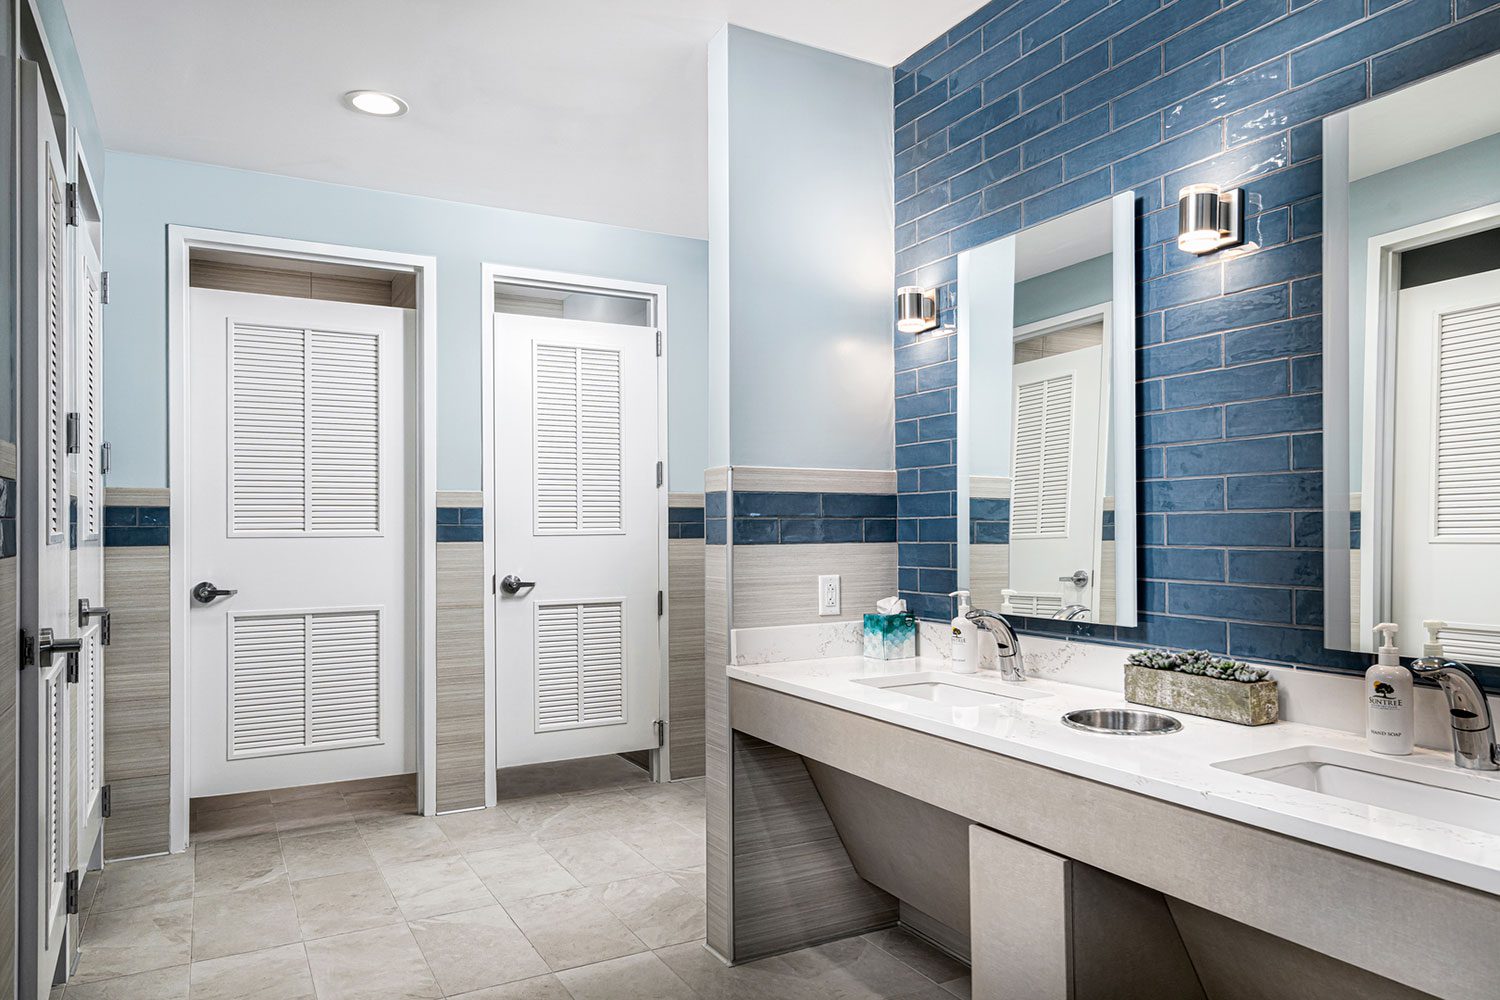 Light Blue and gray bathroom with blue brink wall behind sinks